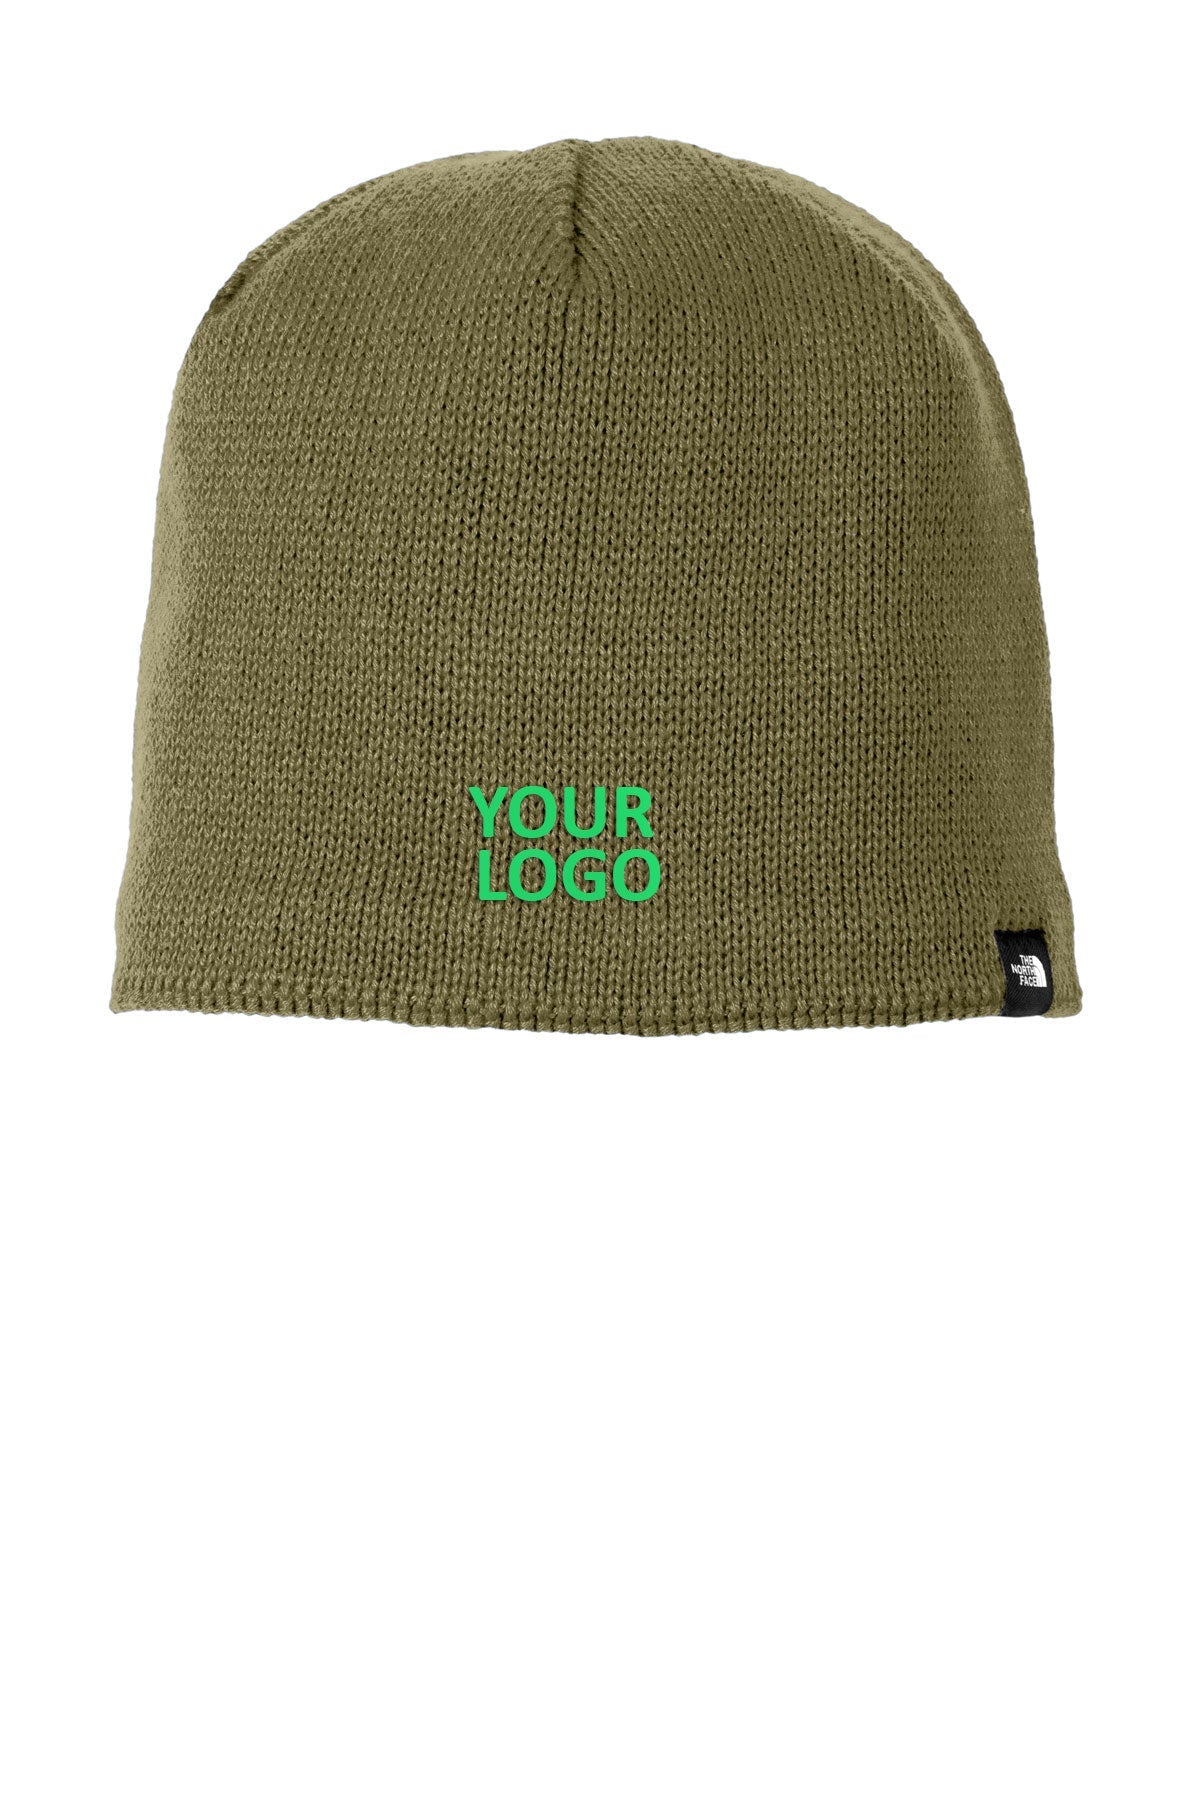 The North Face Burnt Olive Green NF0A4VUB The-North-Face-Mountain-Beanie-NF0A4VUB-Burnt-Olive-Green